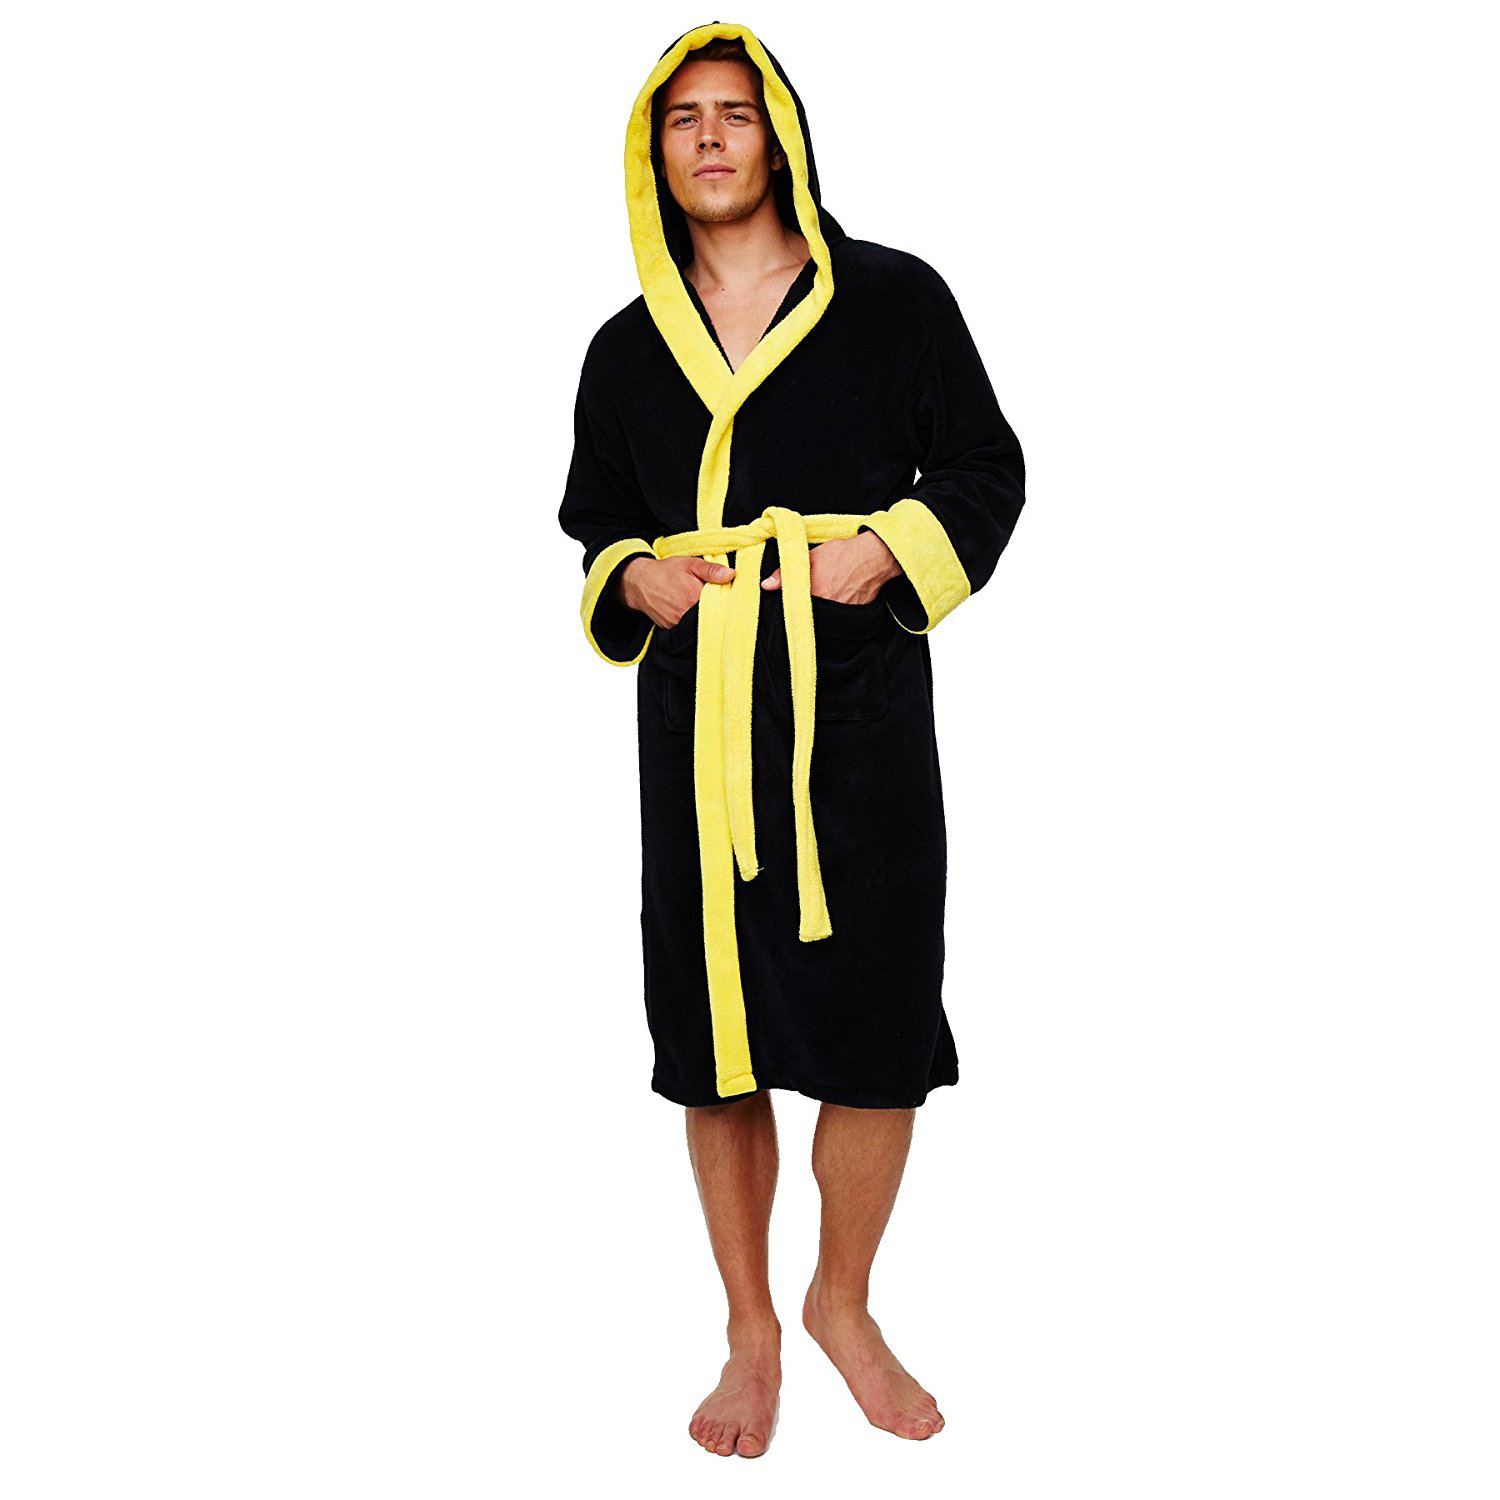 Wholesale cheap boxing robe For Proper Martial Art Training Gear 